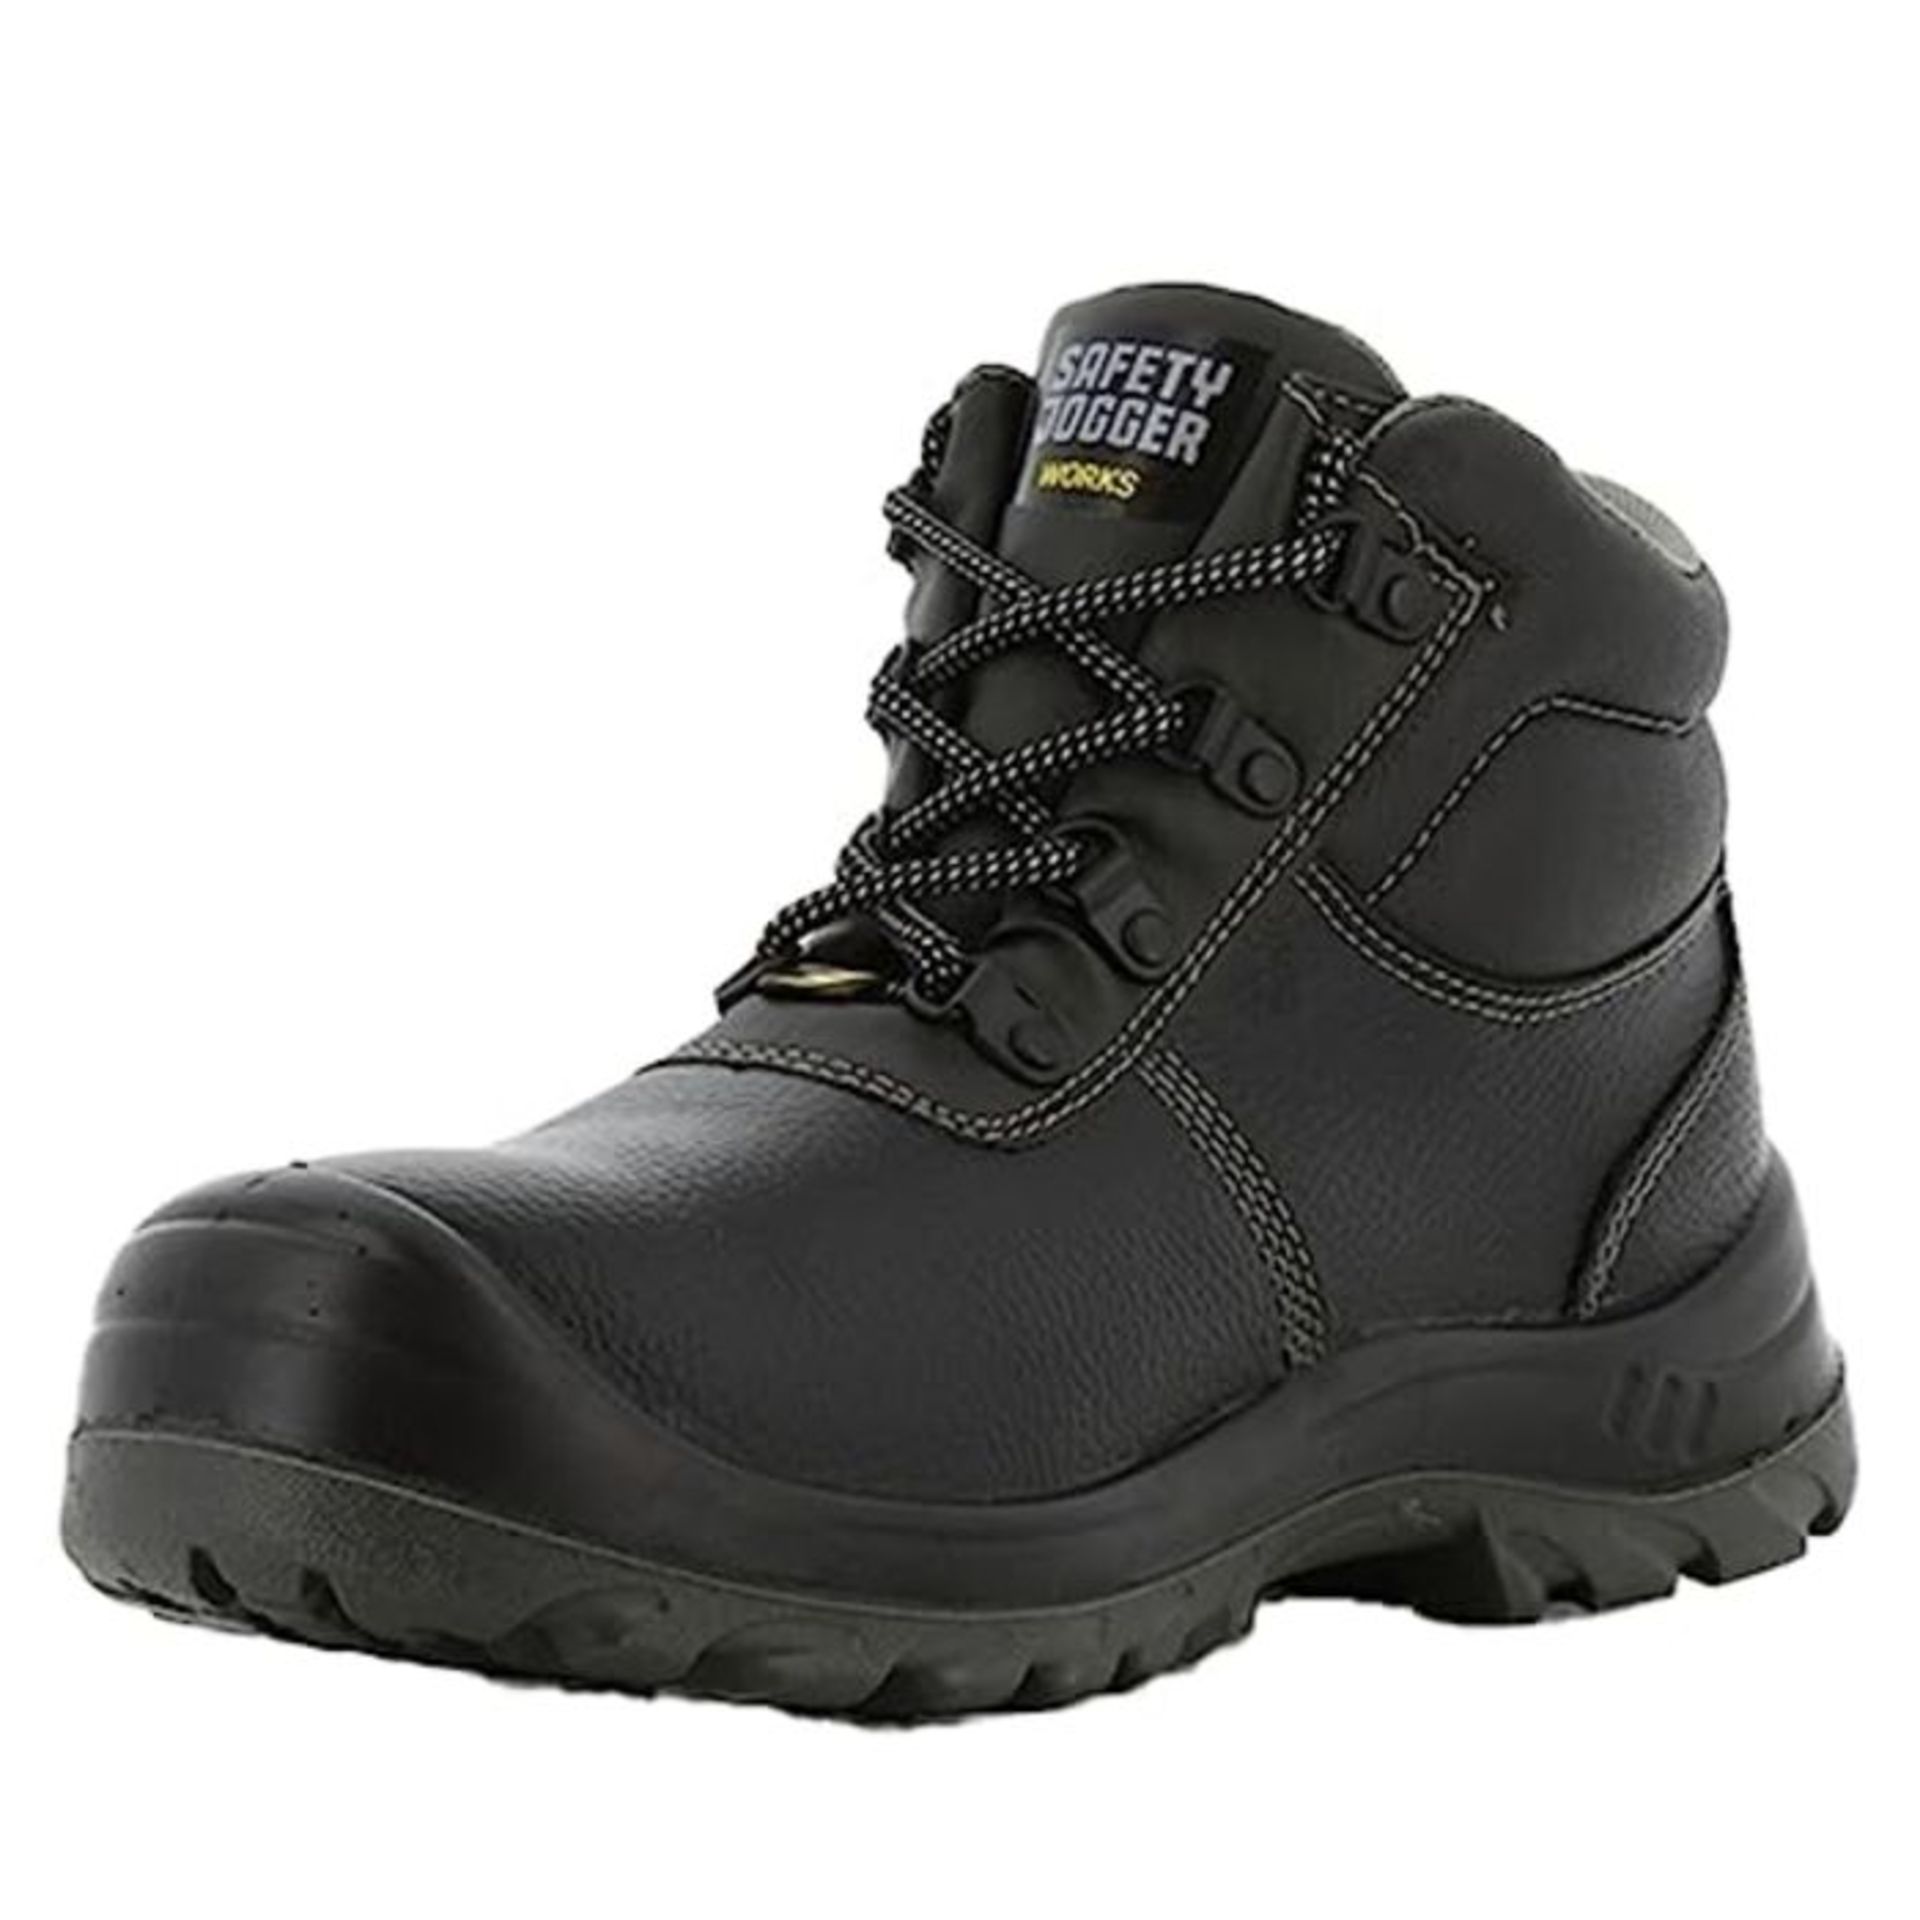 SAFETY JOGGER Safety Boot - BESTBOY - Steel Toe Cap S3/S1P Work Shoe for Men or Women,